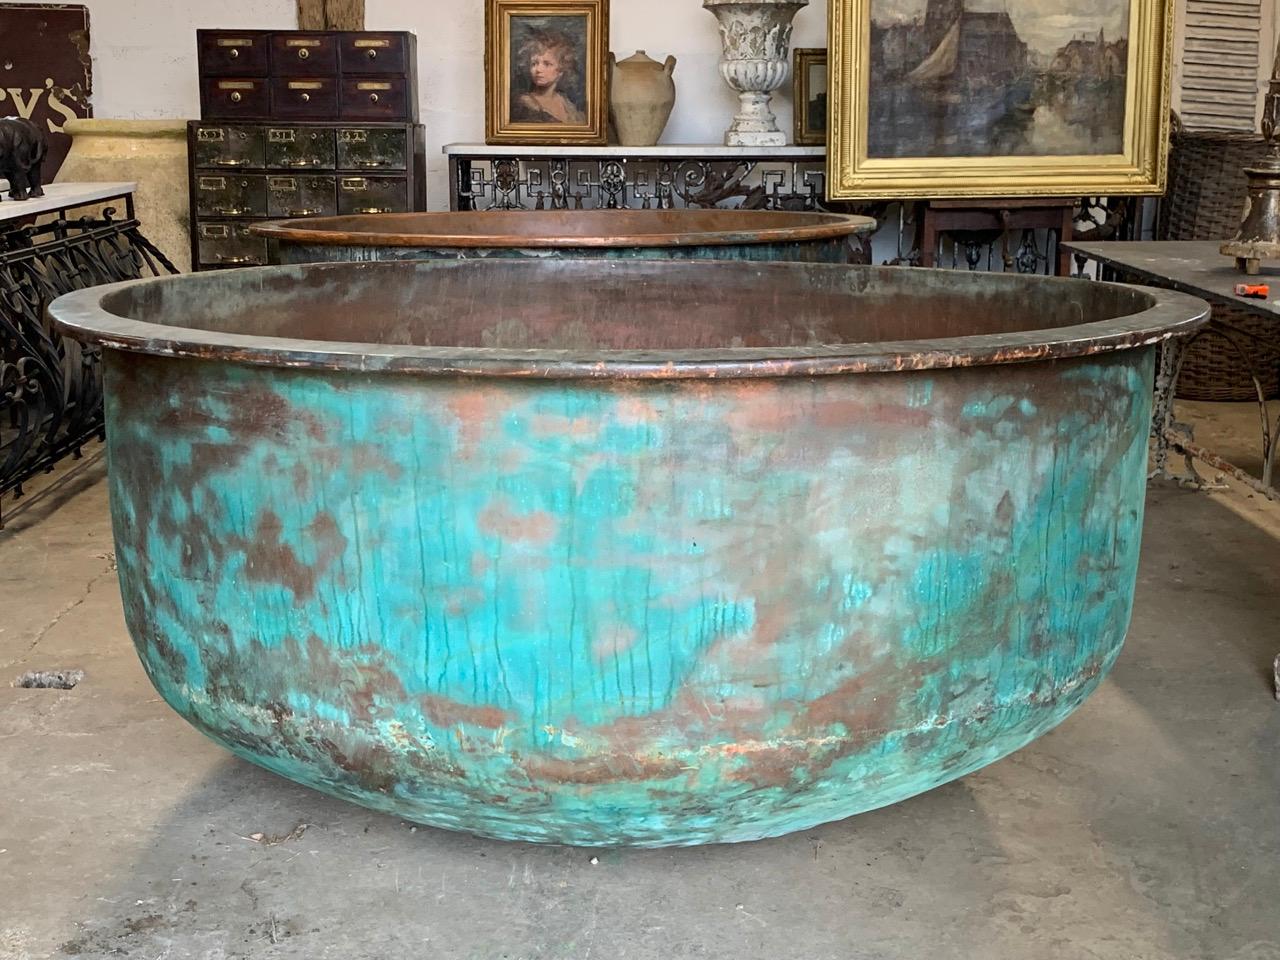 A huge 19th century copper cheese vat from the south of France. This will make a great garden feature as a planter or water feature.